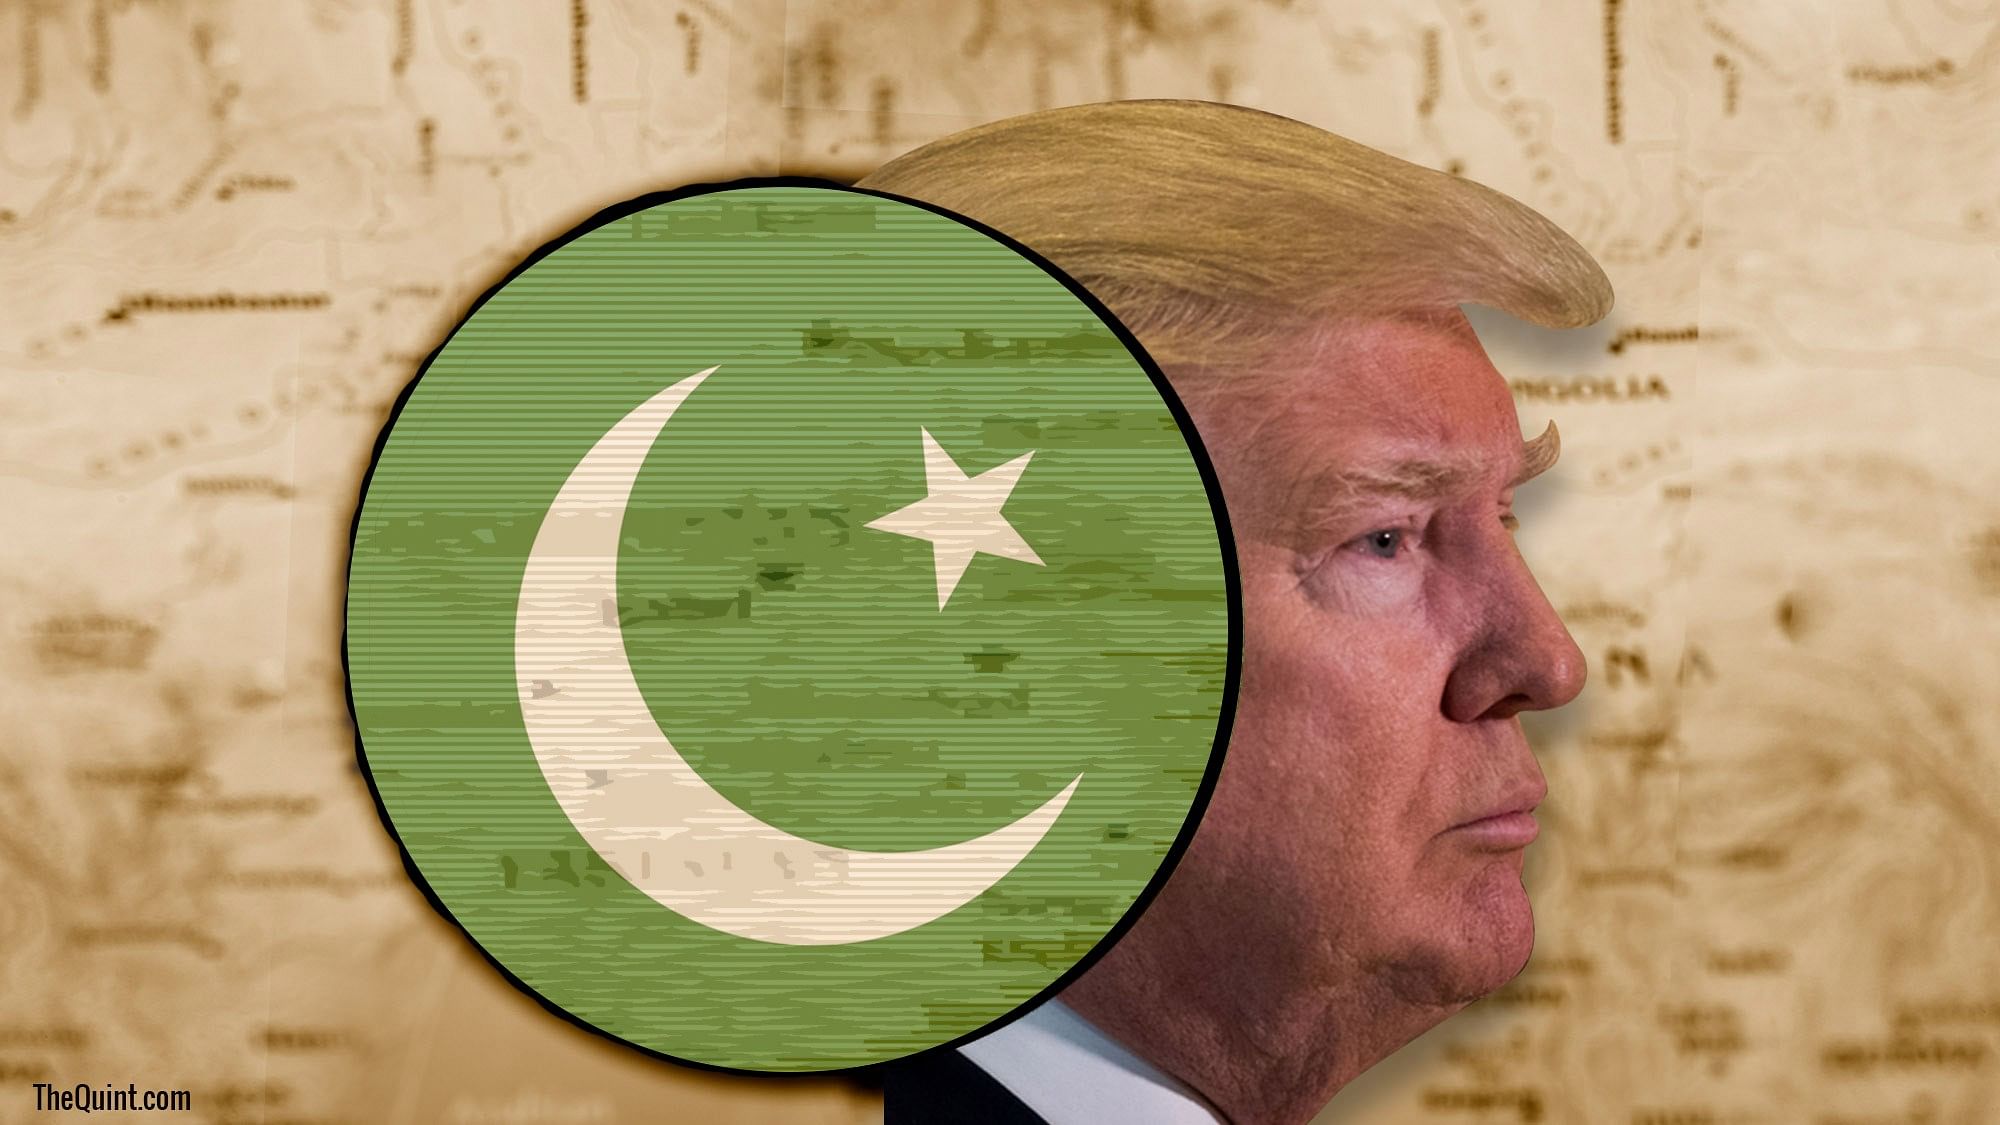 So far, Pakistan authorities have not commented on the US move to sanction the companies.